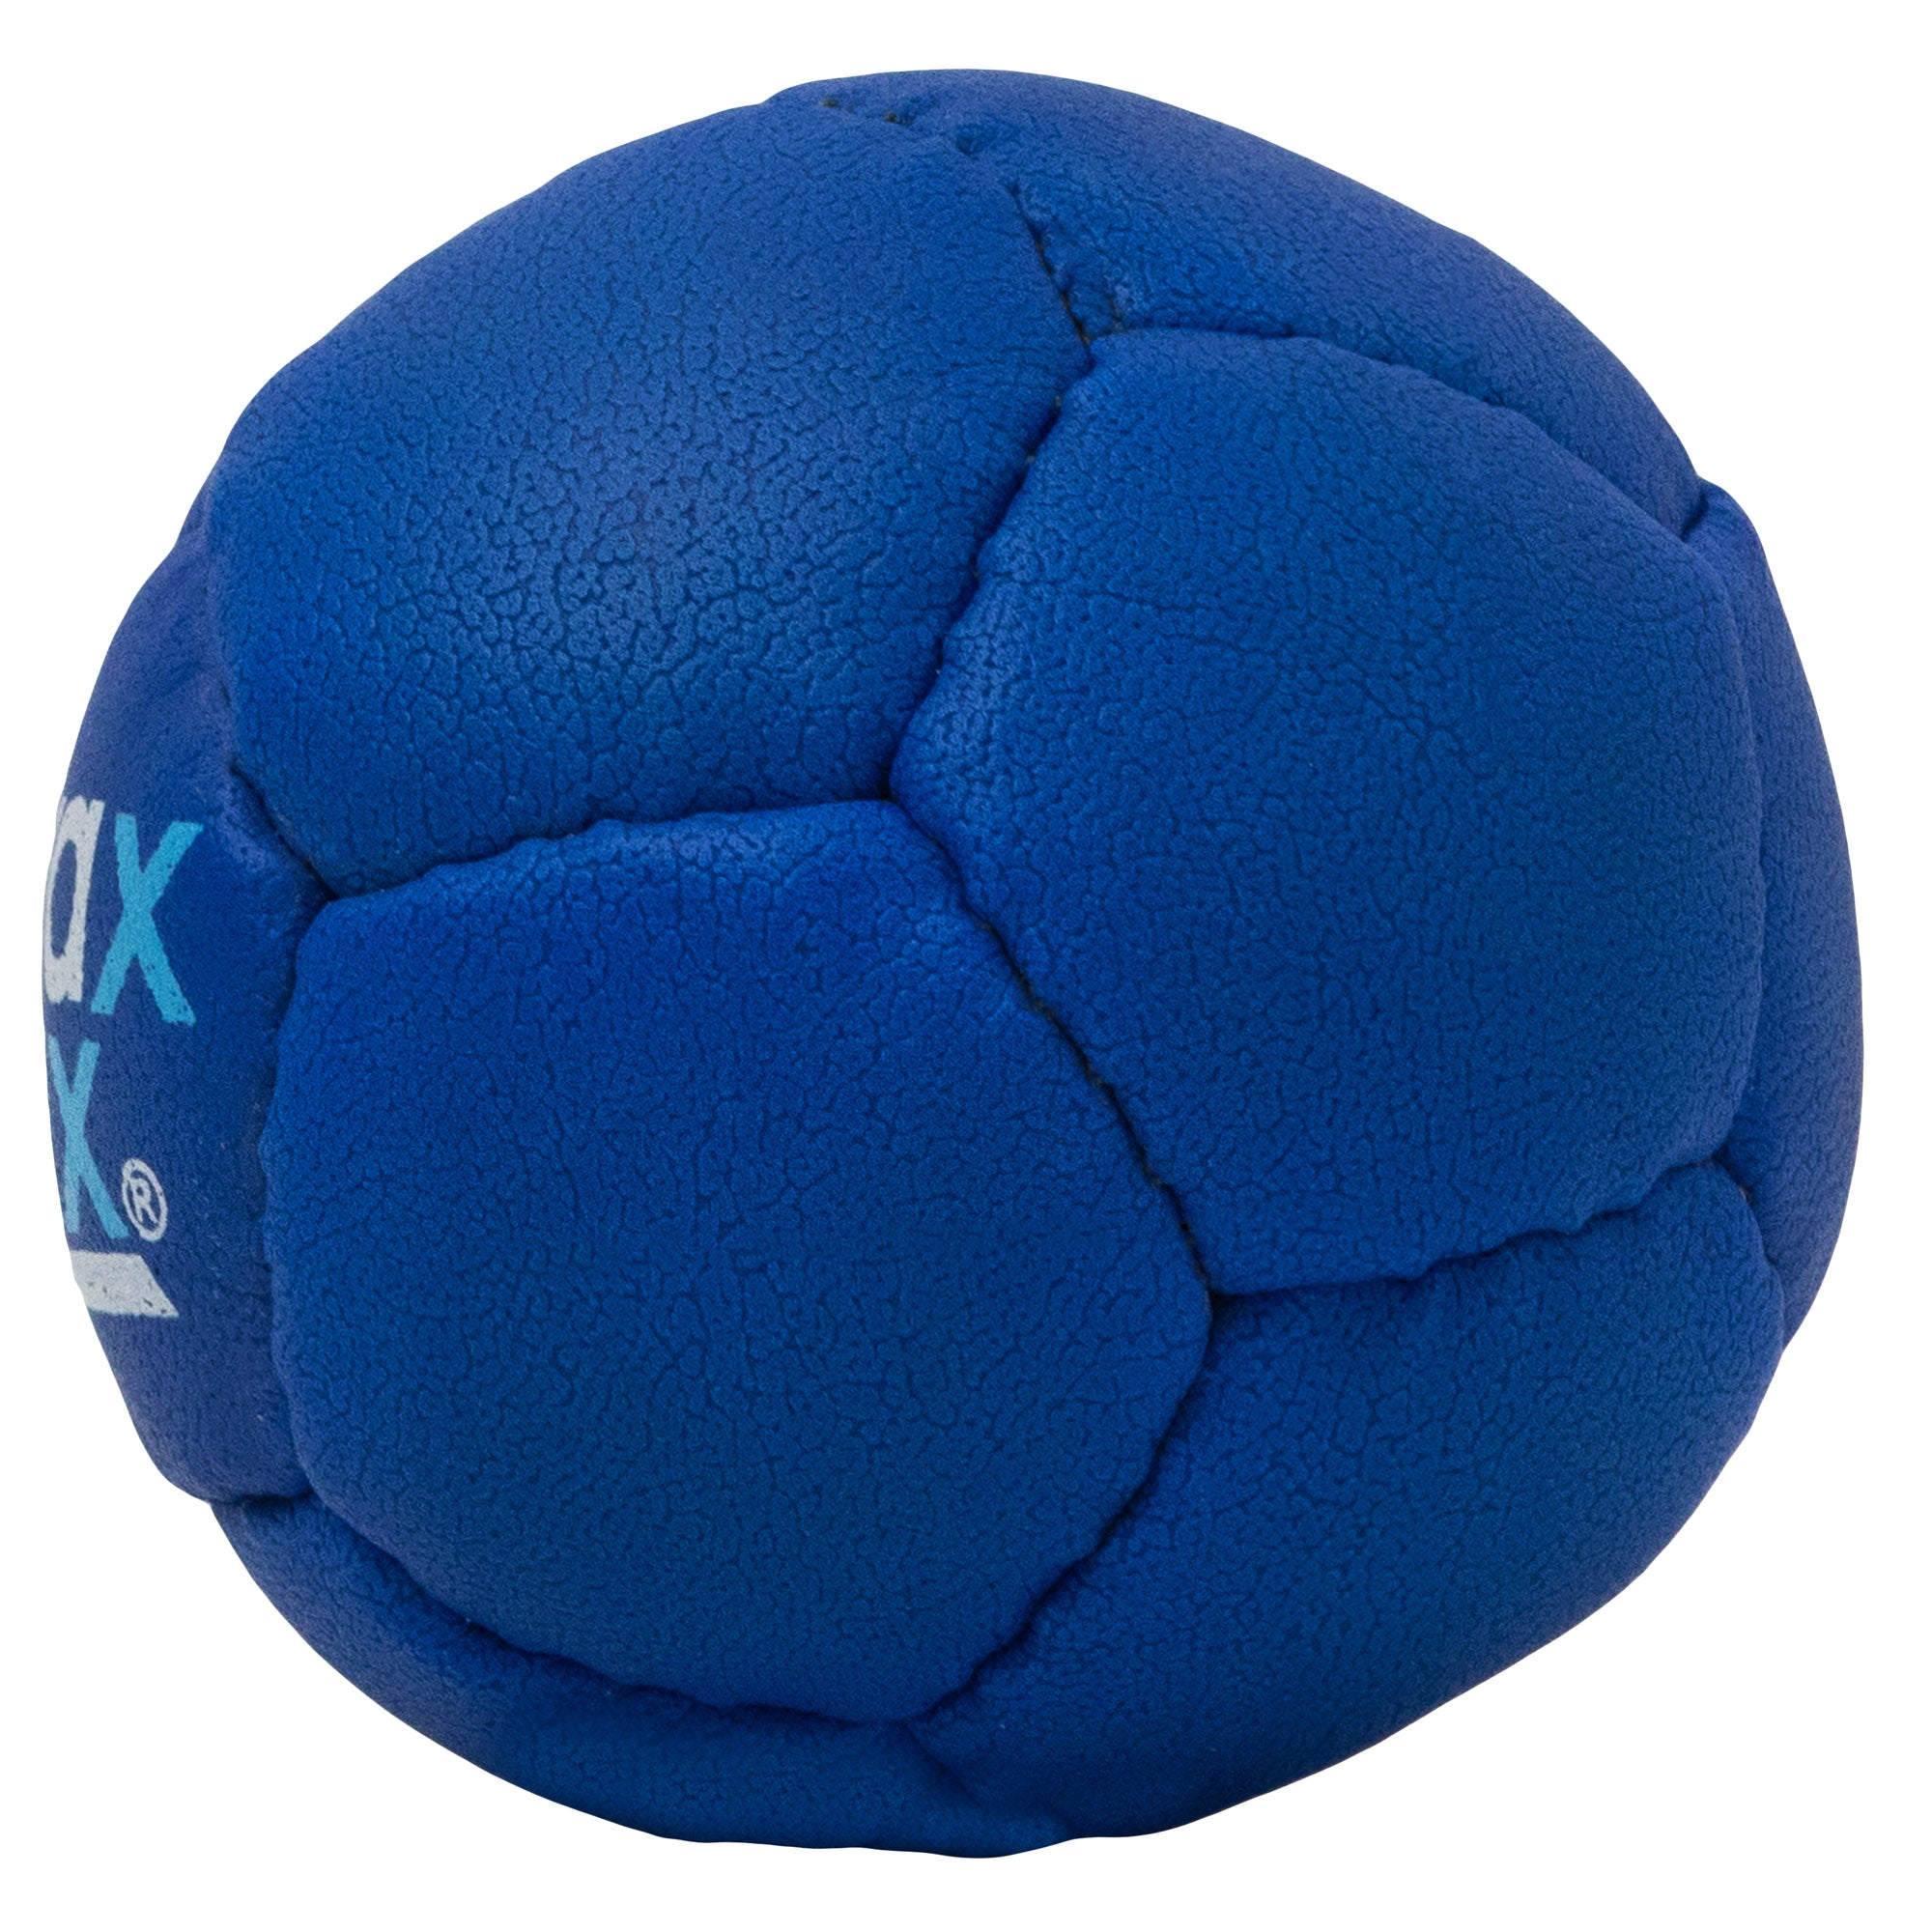 Blue Swax Lax lacrosse training ball - side view